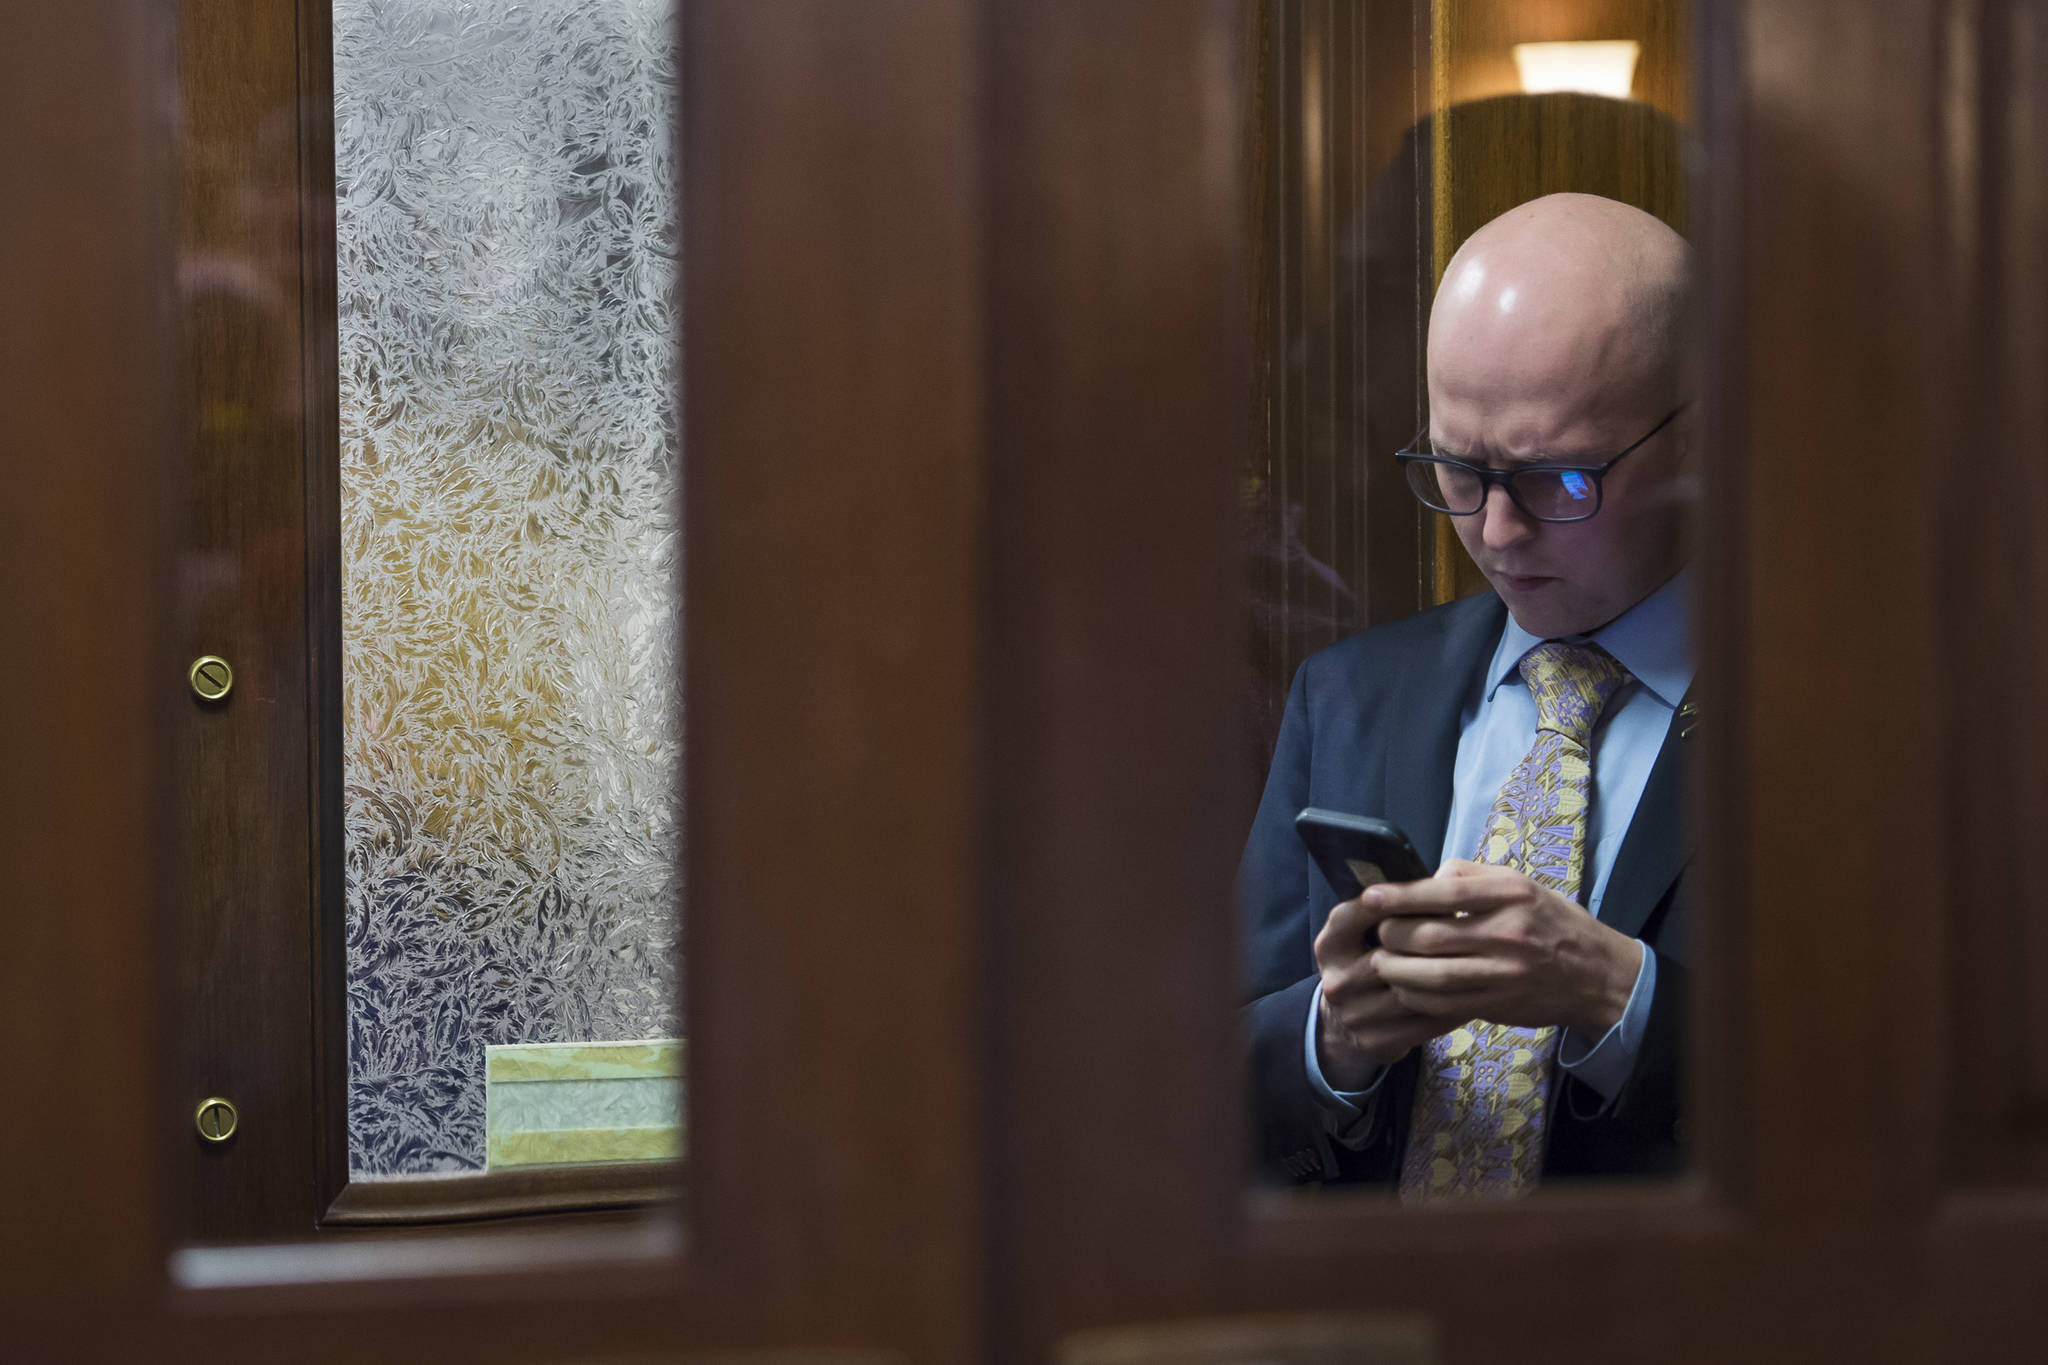 Rep. Jonathan Kreiss-Tomkins, D-Sitka, steps out of the House chambers to use his cell phone on the opening day of the 31st Session of the Alaska Legislature on Tuesday, Jan. 15, 2019. (Michael Penn | Juneau Empire)